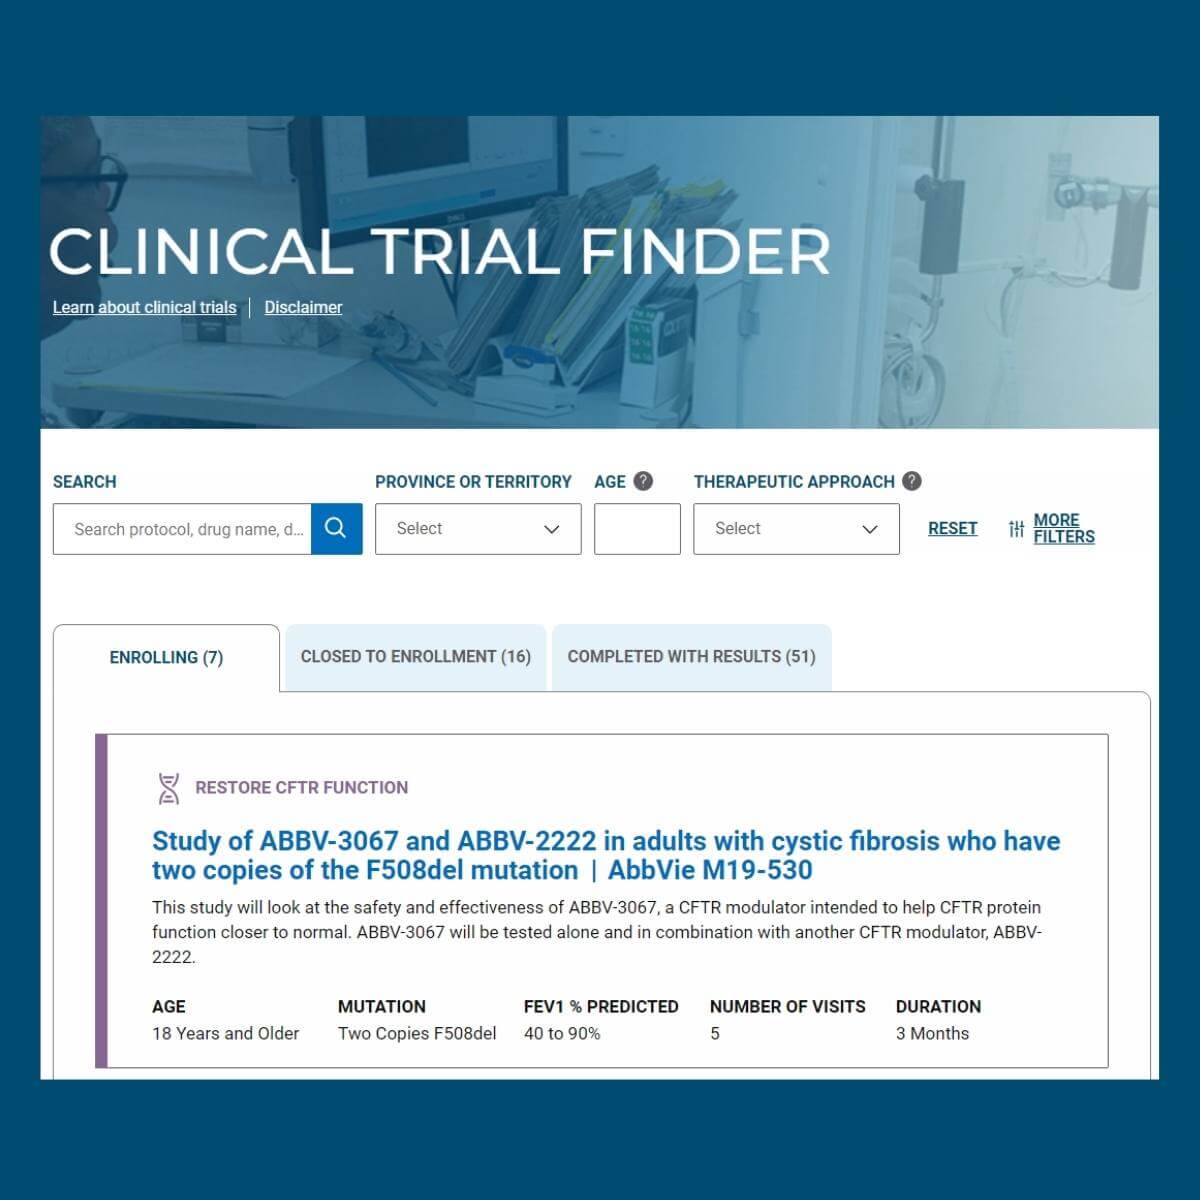 CLINICAL TRIAL FINDER interface